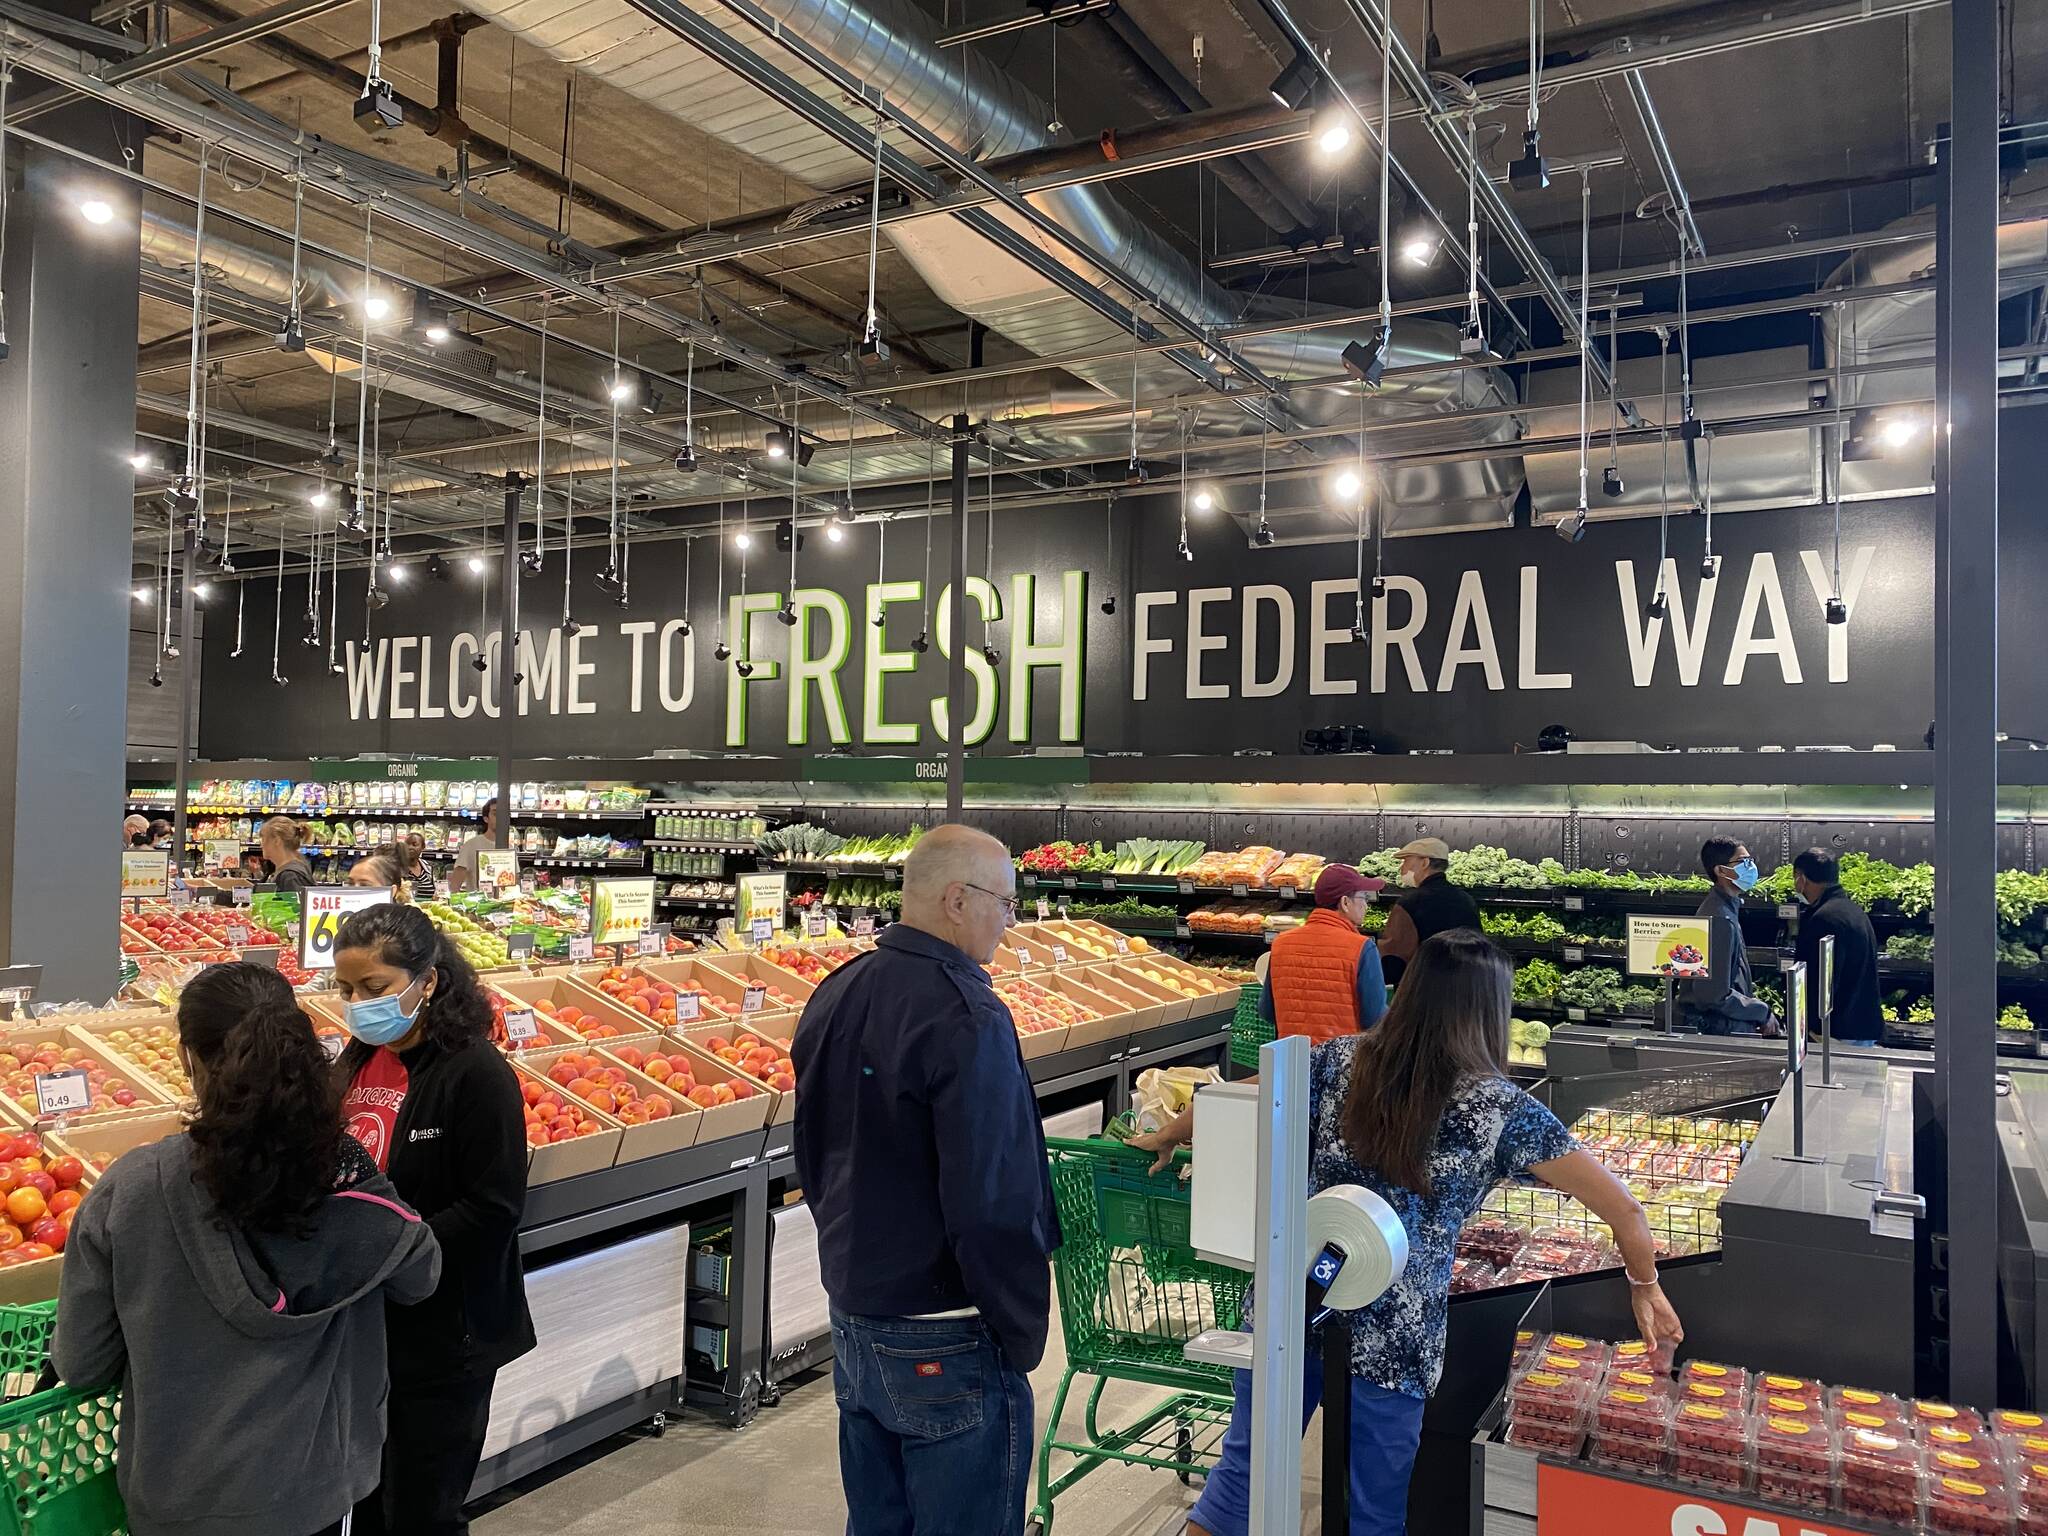 photos by Olivia Sullivan/the Mirror
A sign in the produce section says “Welcome to Fresh Federal Way.”